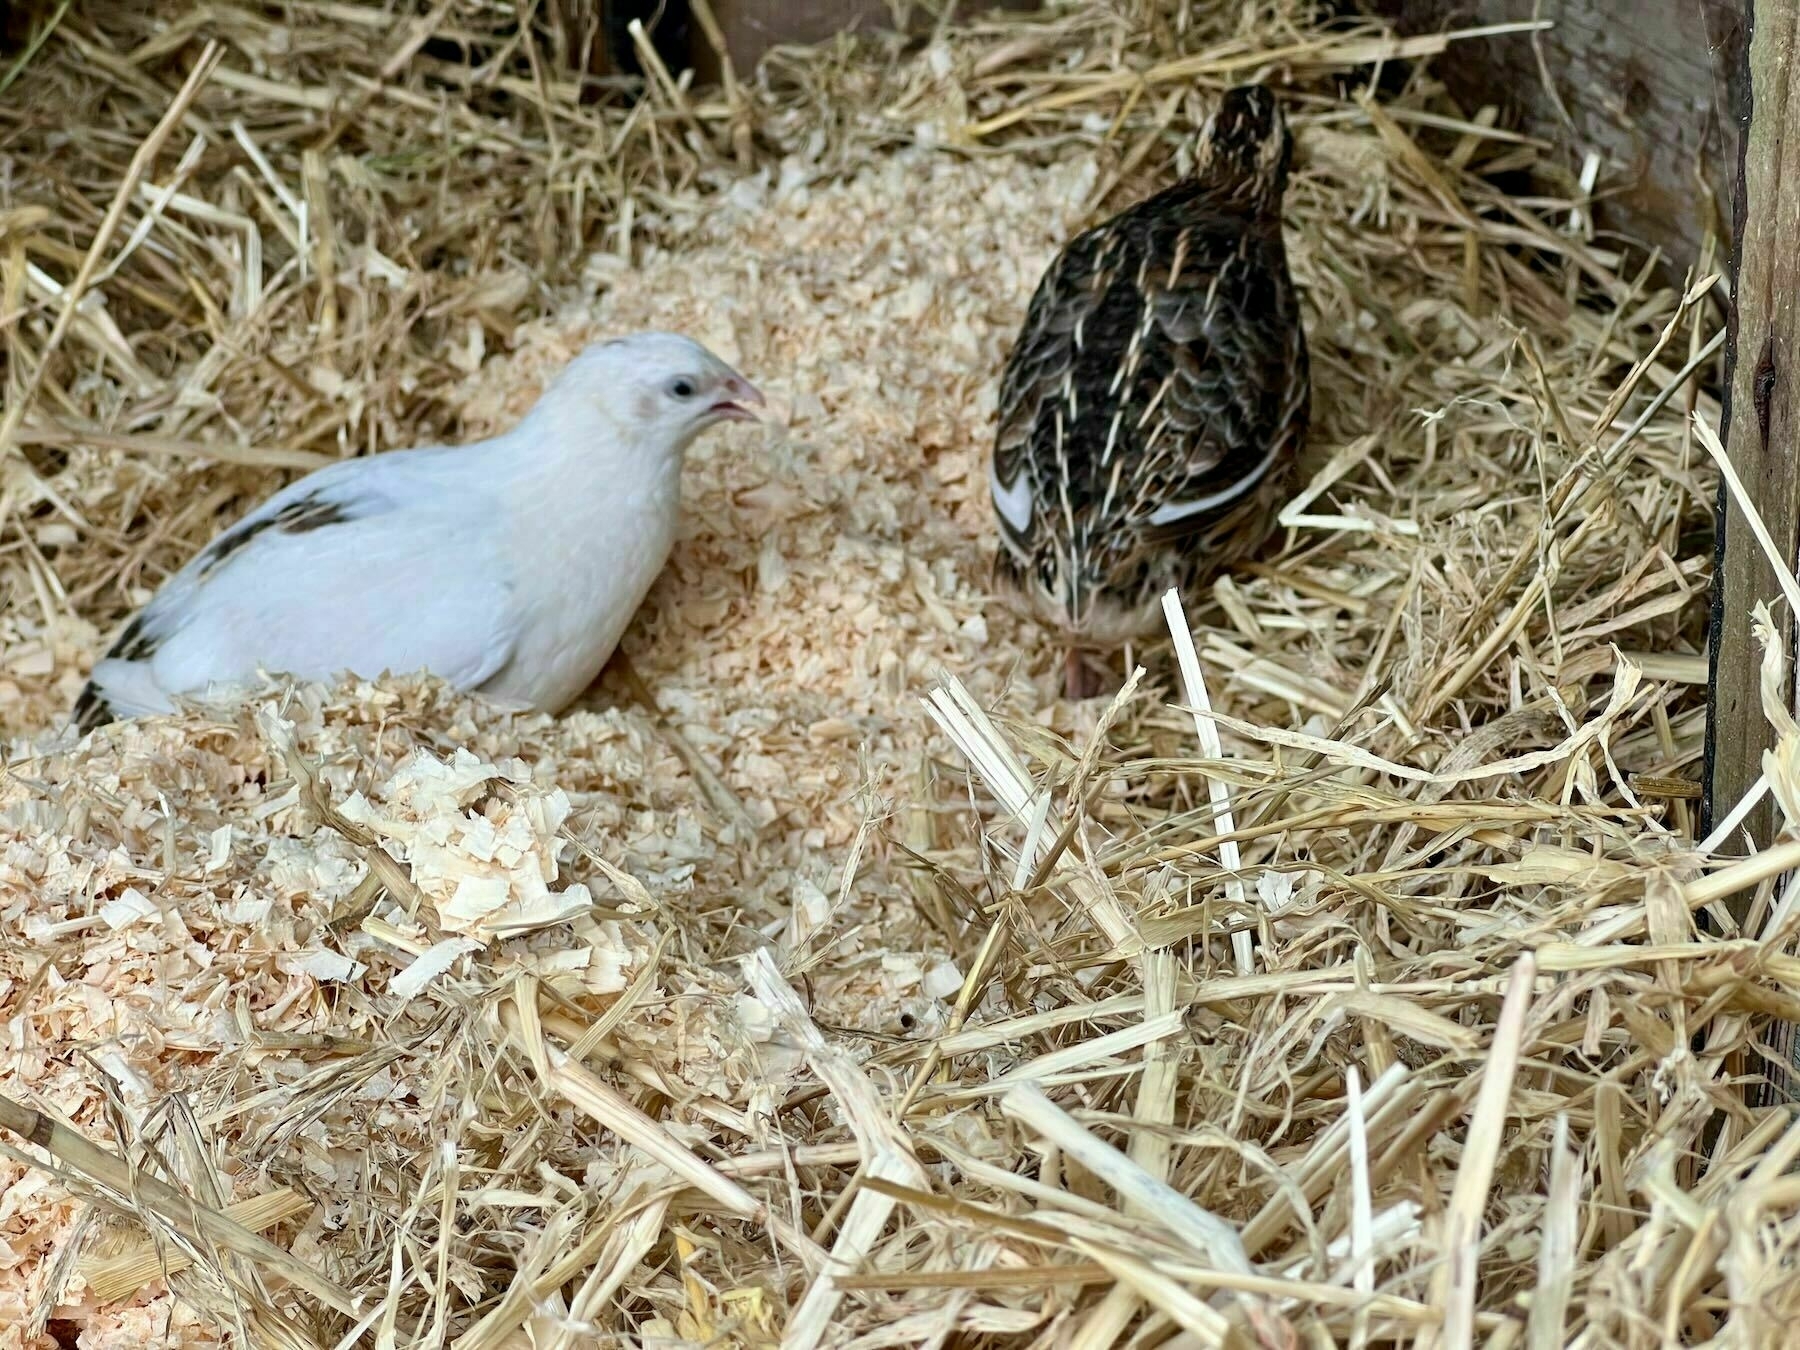 Small white bird and small stripy bird on a pile of straw. 